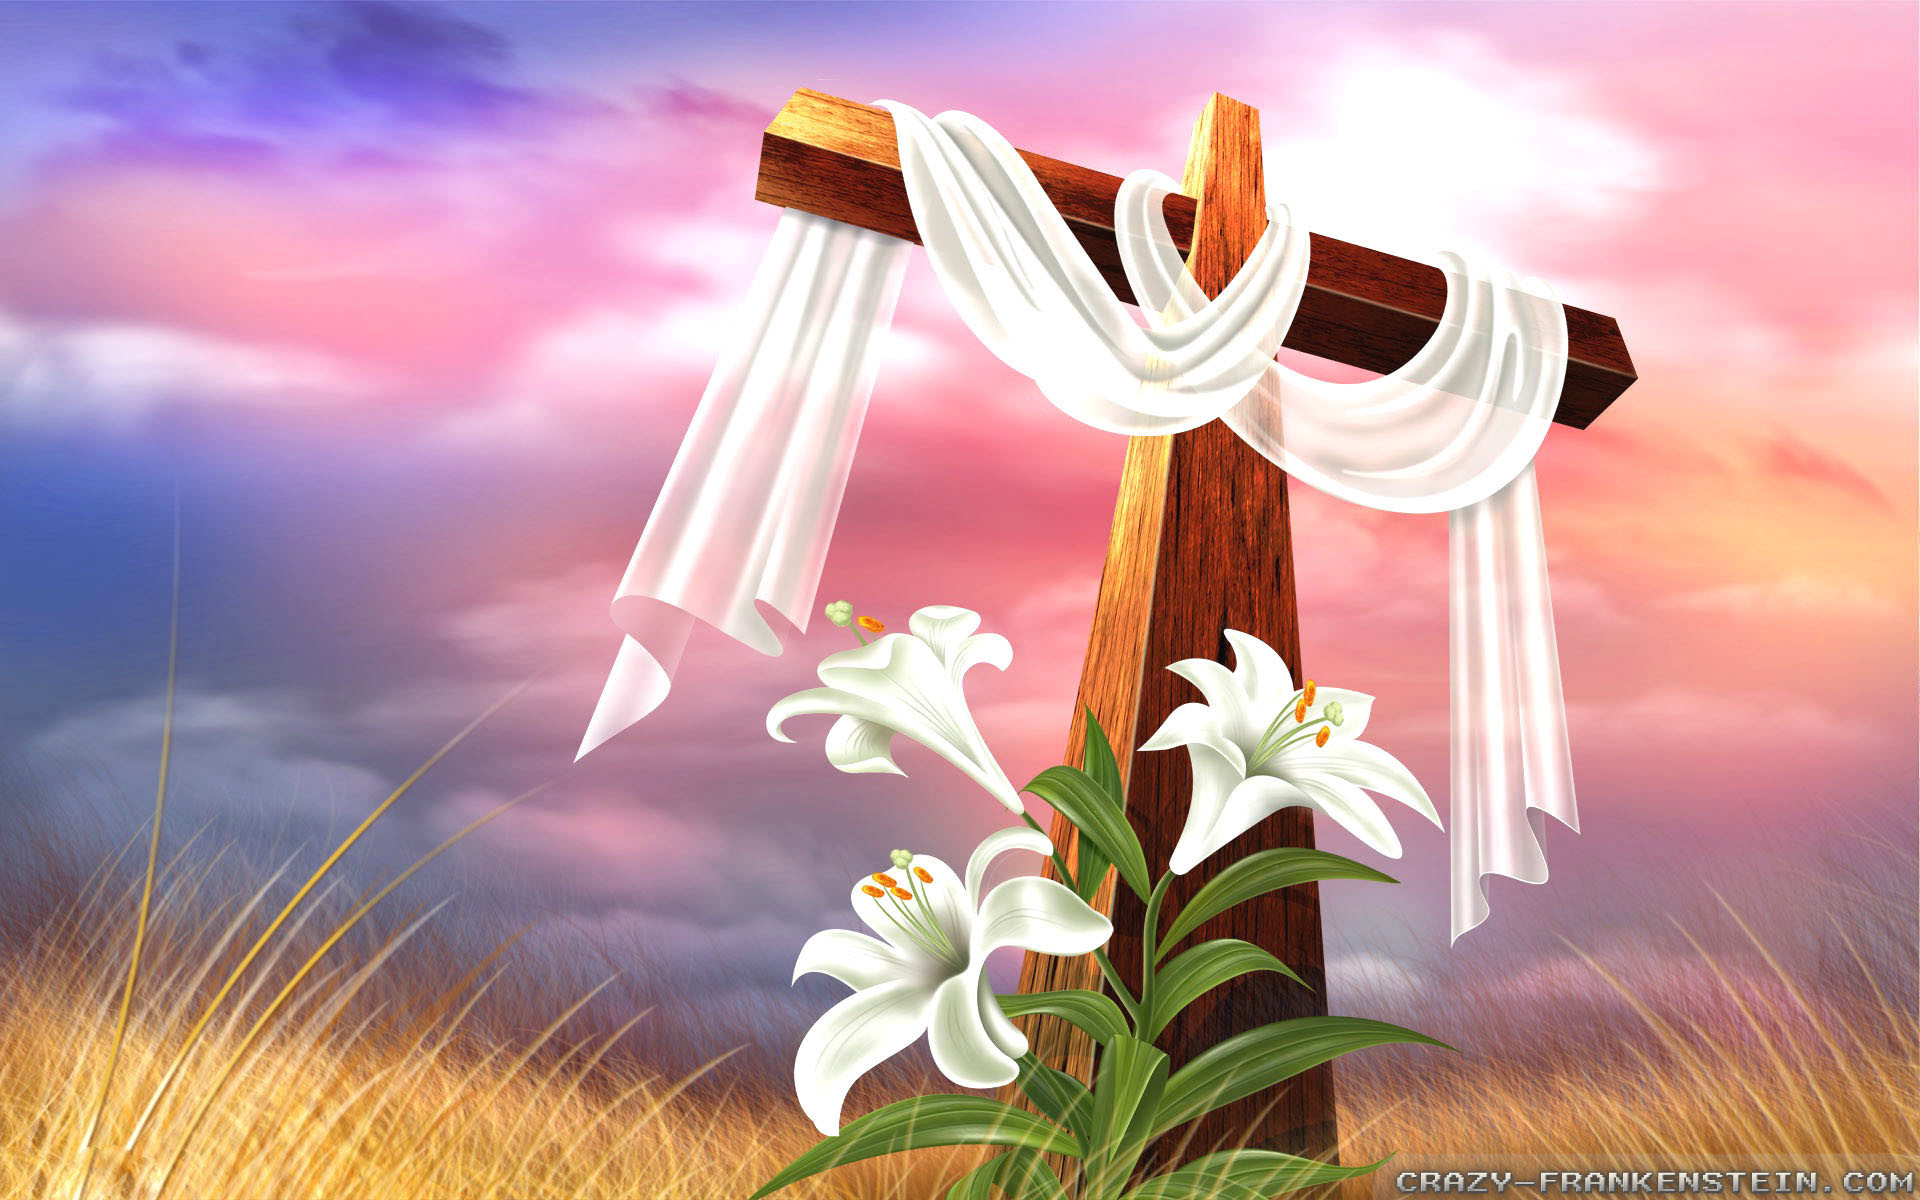 1920x1200 Wallpaper: Good Friday Easter wallpapers. Resolution: 1024x768 | 1280x1024  | 1600x1200. Widescreen Res: 1440x900 | 1680x1050 | 